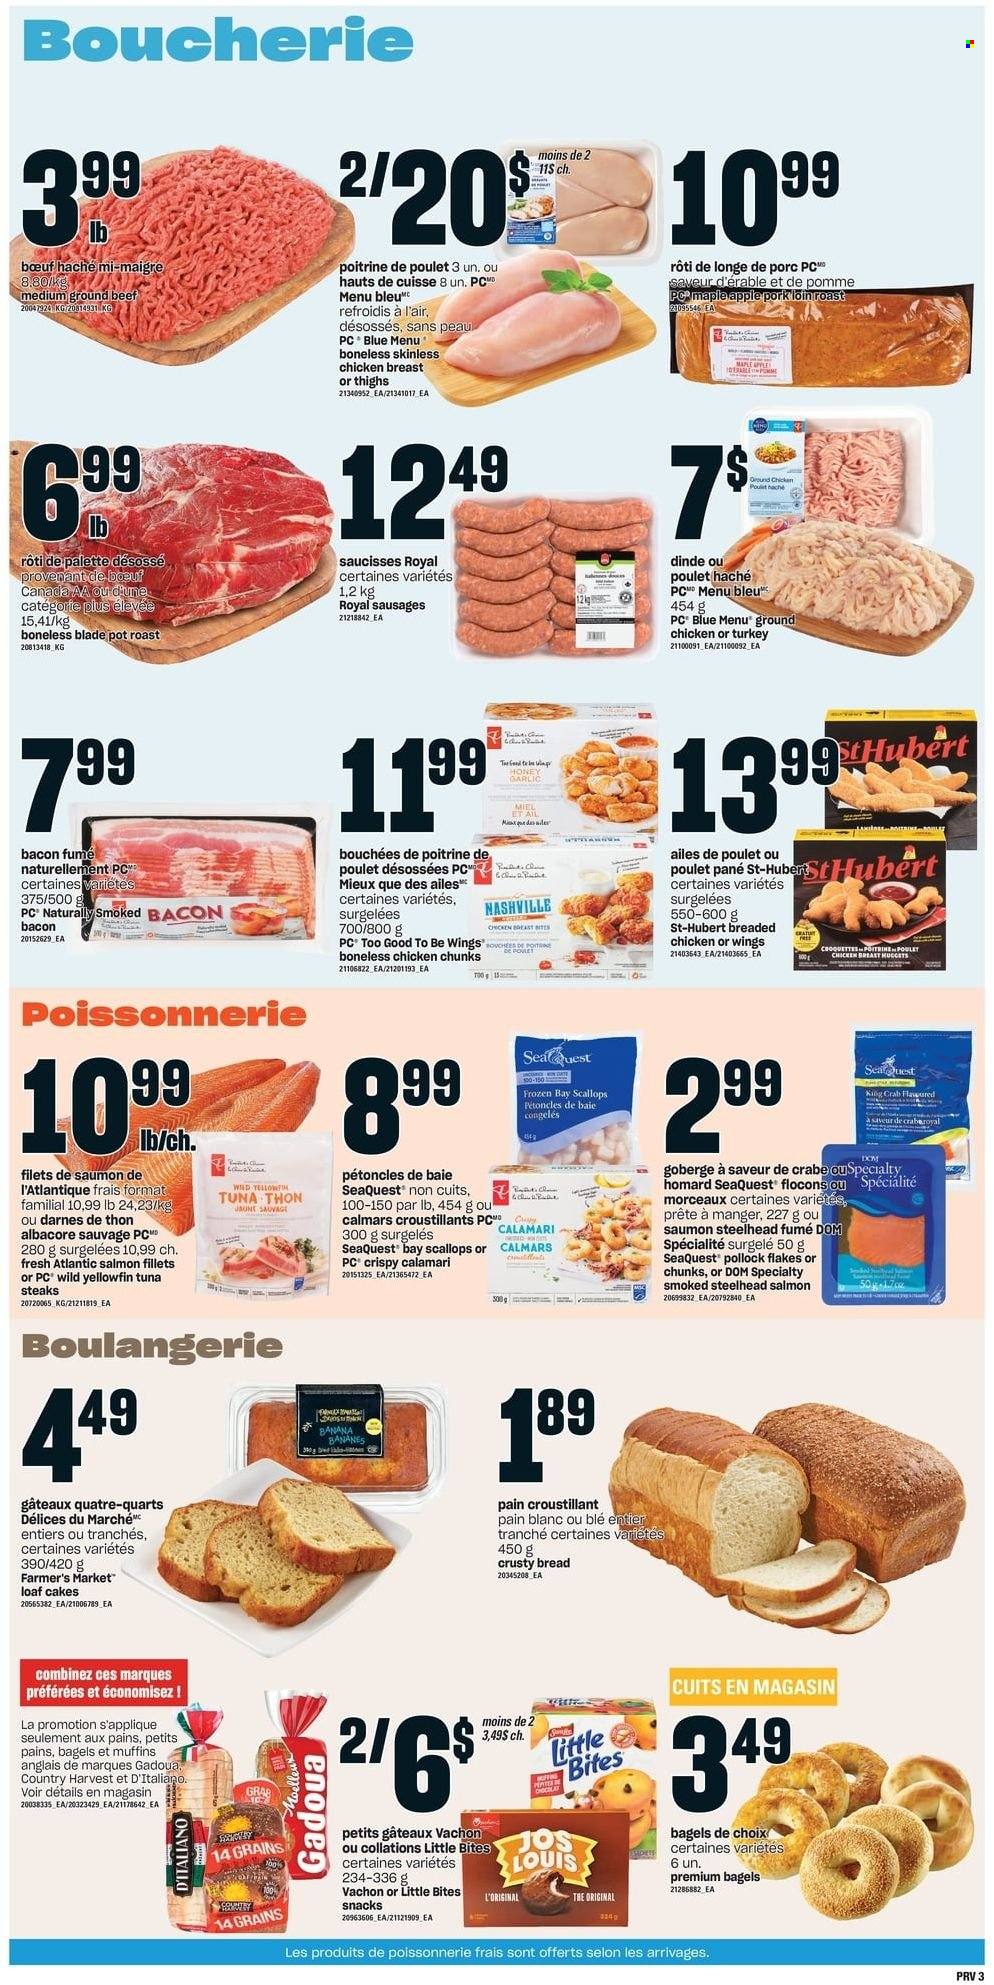 thumbnail - Provigo Flyer - January 06, 2022 - January 12, 2022 - Sales products - bagels, bread, cake, muffin, calamari, salmon, salmon fillet, scallops, tuna, pollock, crab, fried chicken, bacon, sausage, Country Harvest, snack, Little Bites, ground chicken, chicken, beef meat, ground beef, pork loin, pork meat, Palette, steak. Page 4.